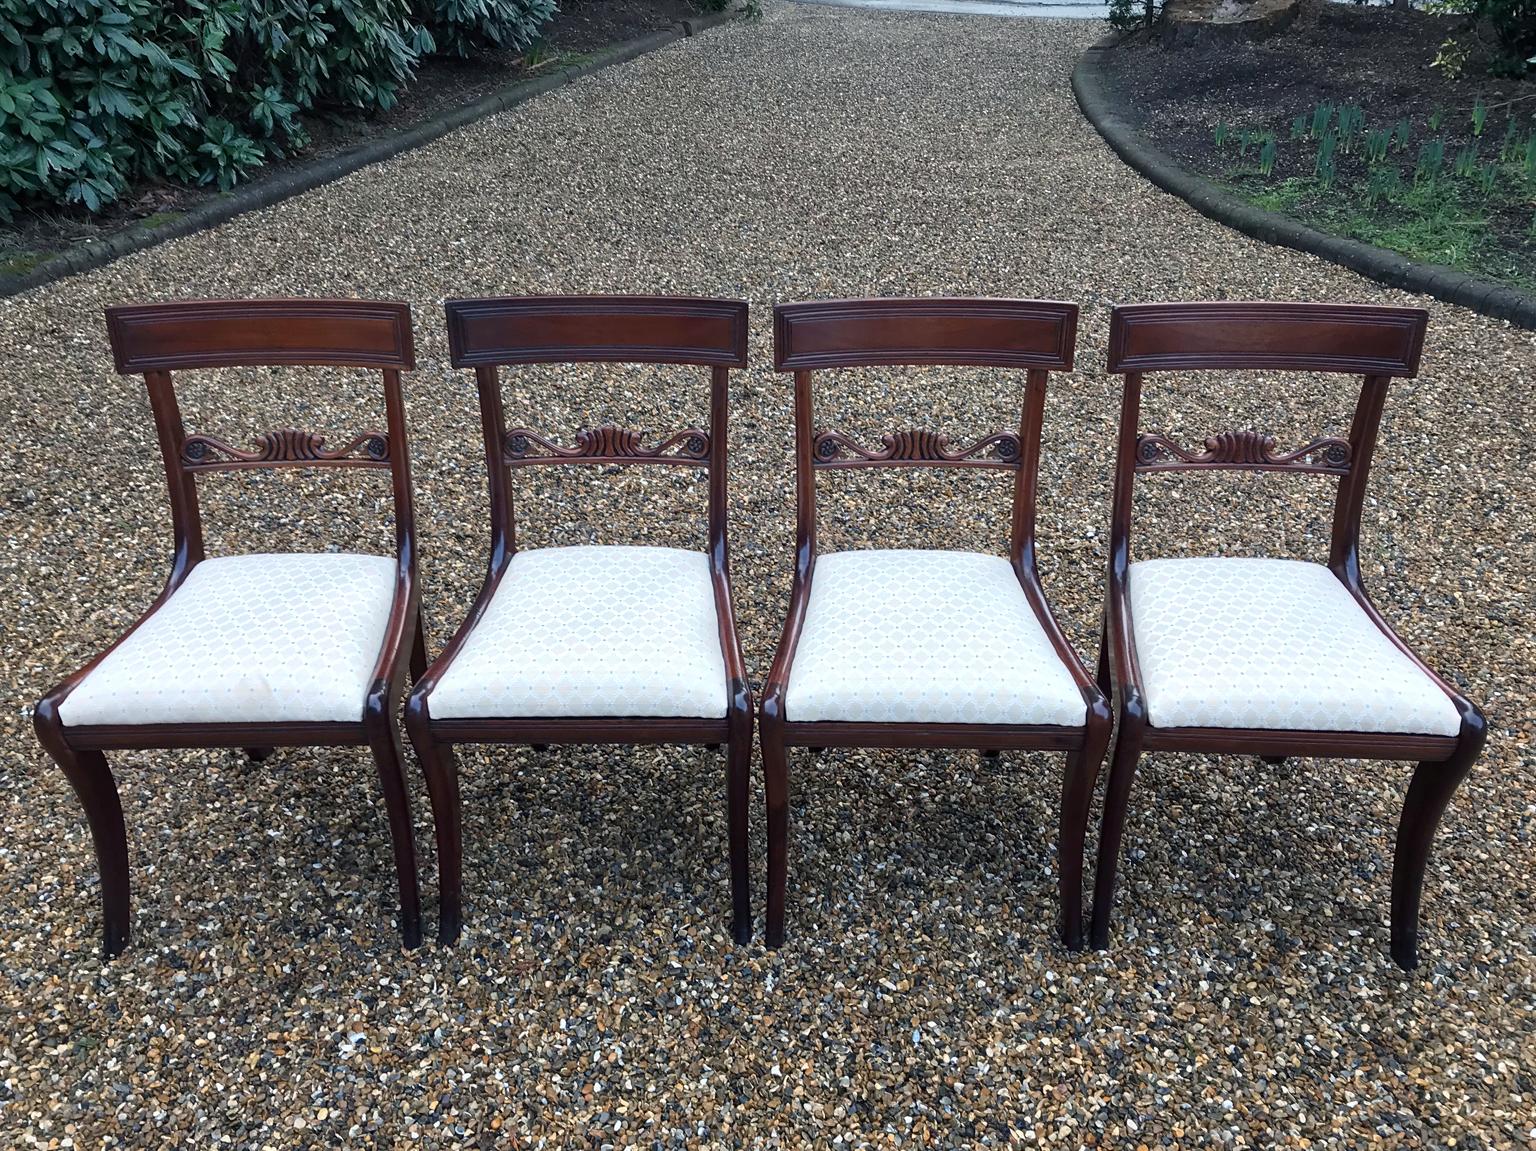 A very good quality Set of Four 19th Century Regency Mahogany Dining Chairs with newly upholstered drop-in seats on saber legs.
circa: 1835

Dimensions:
Height: 33 inches - 83.5 cms
Height to Seat: 18 inches - 46 cms
Width: 18.5 inches - 47